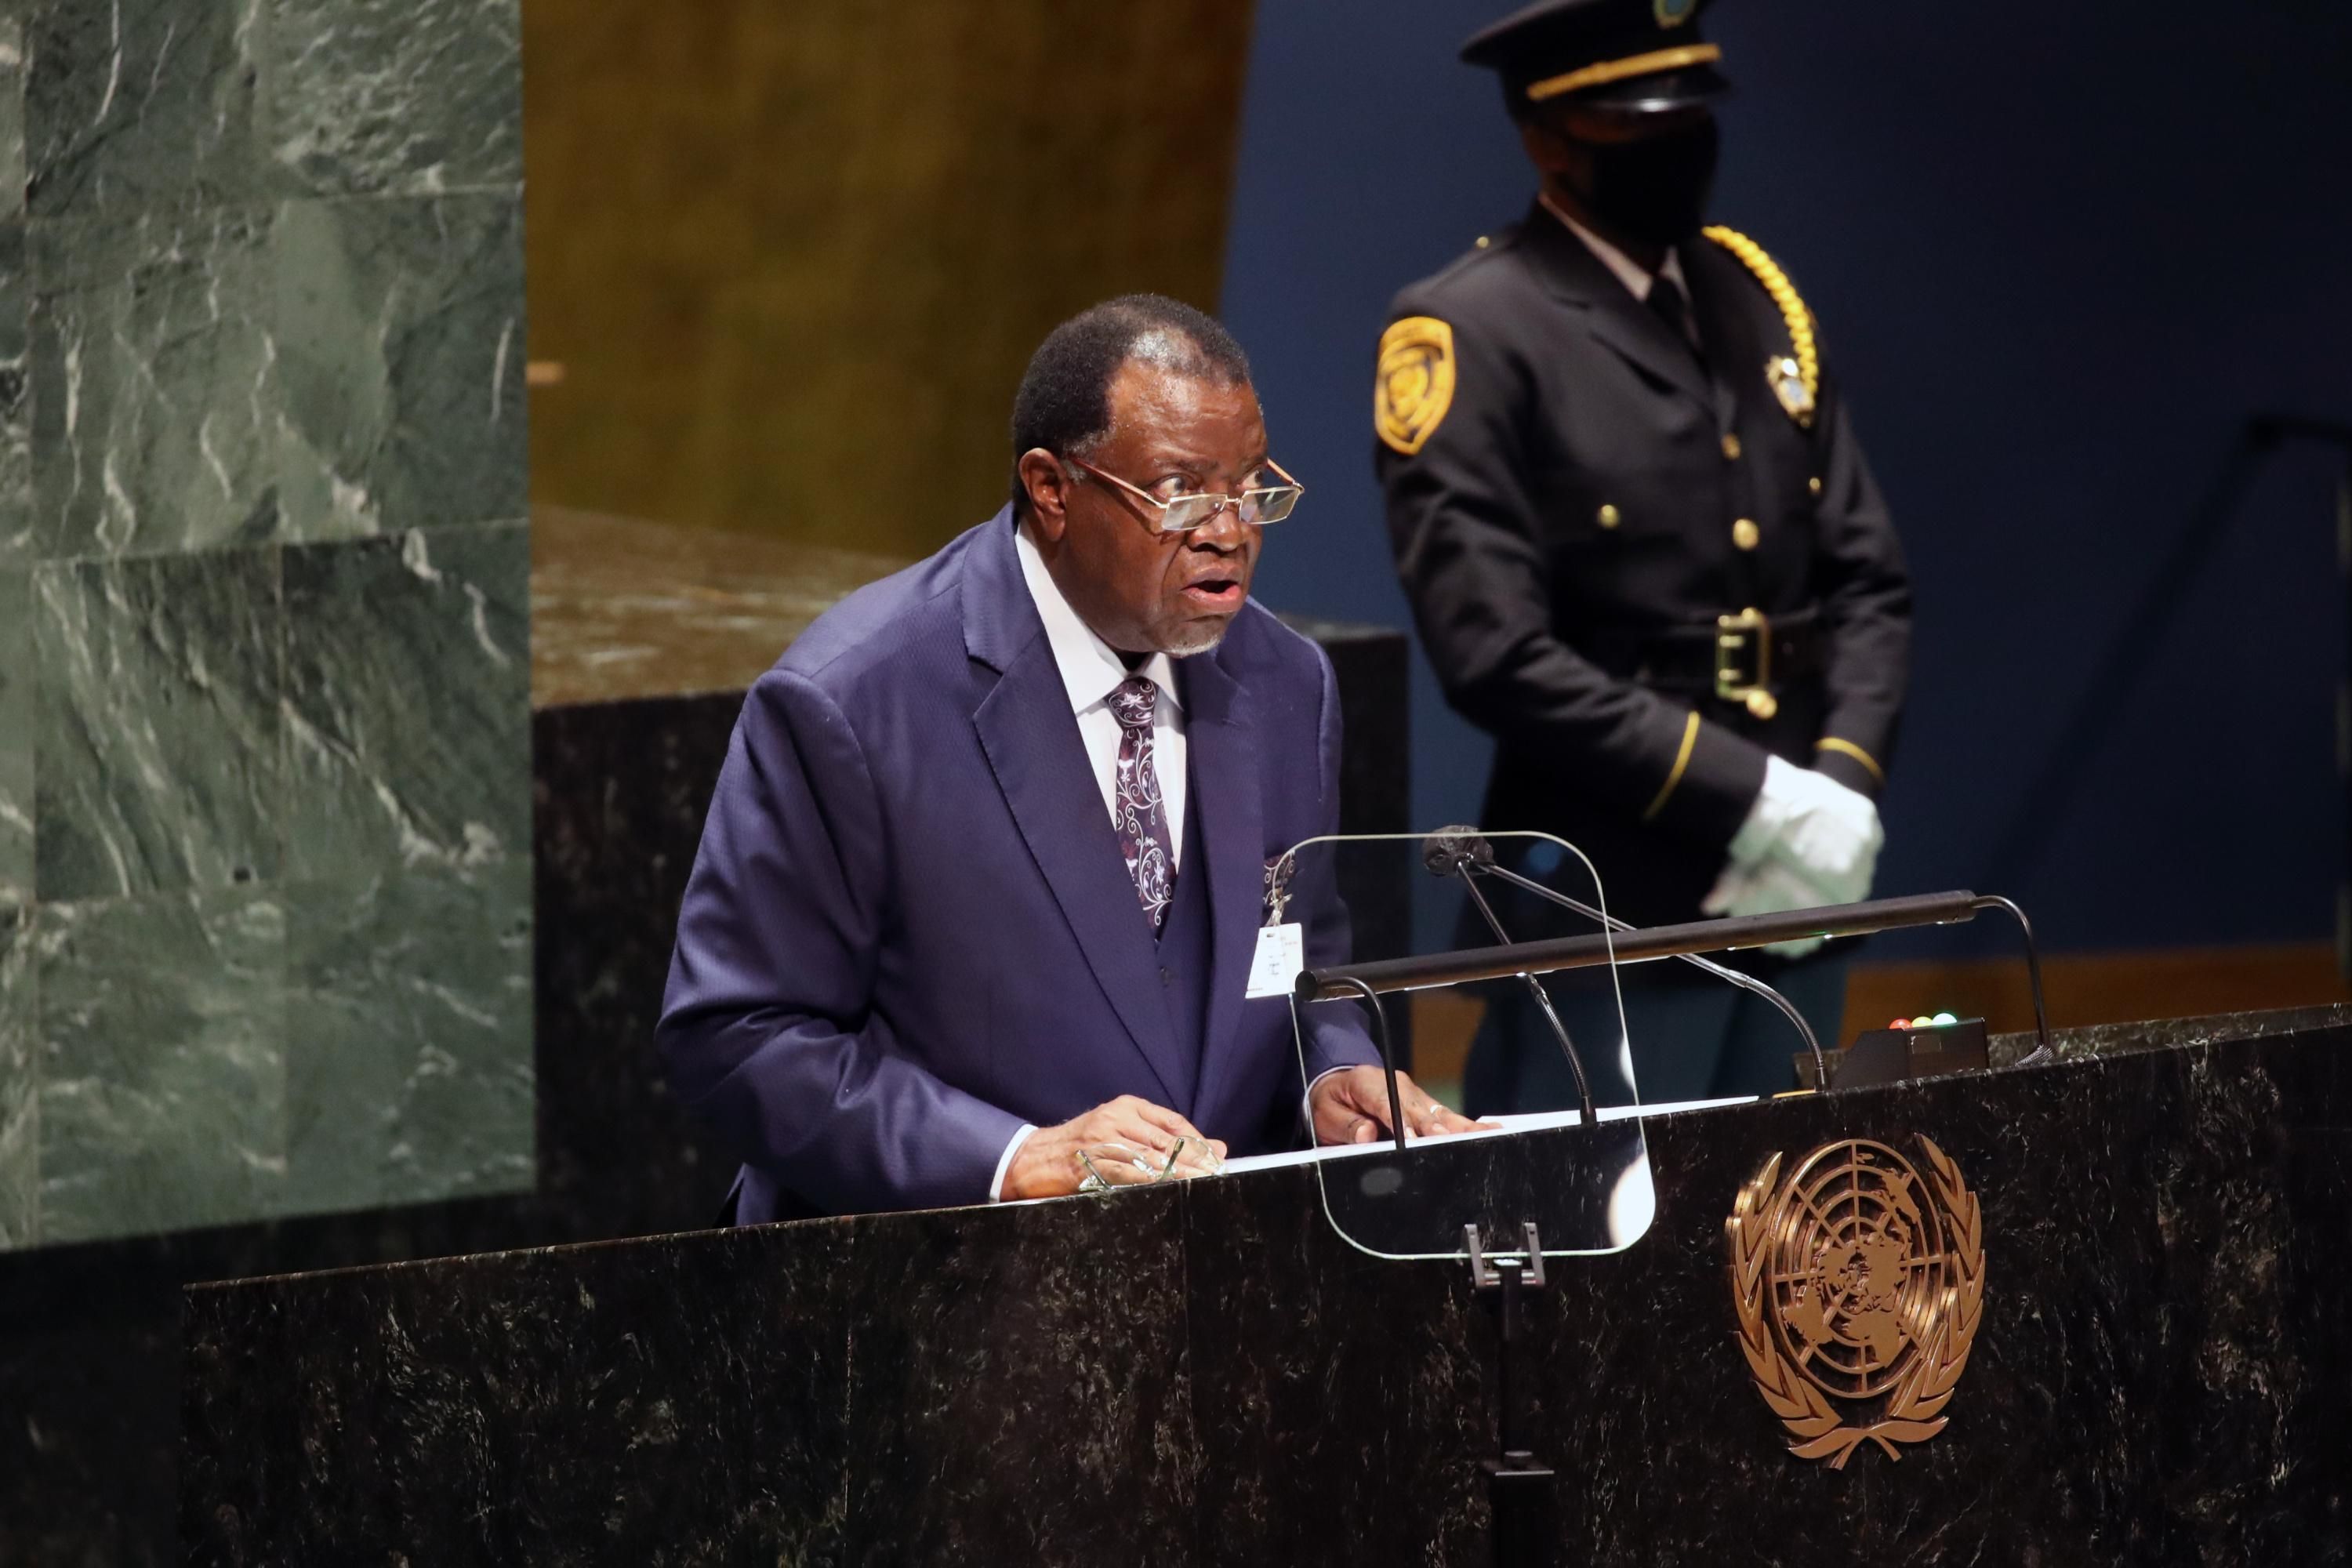 Namibia's president speaks at the U.N. General Assembly